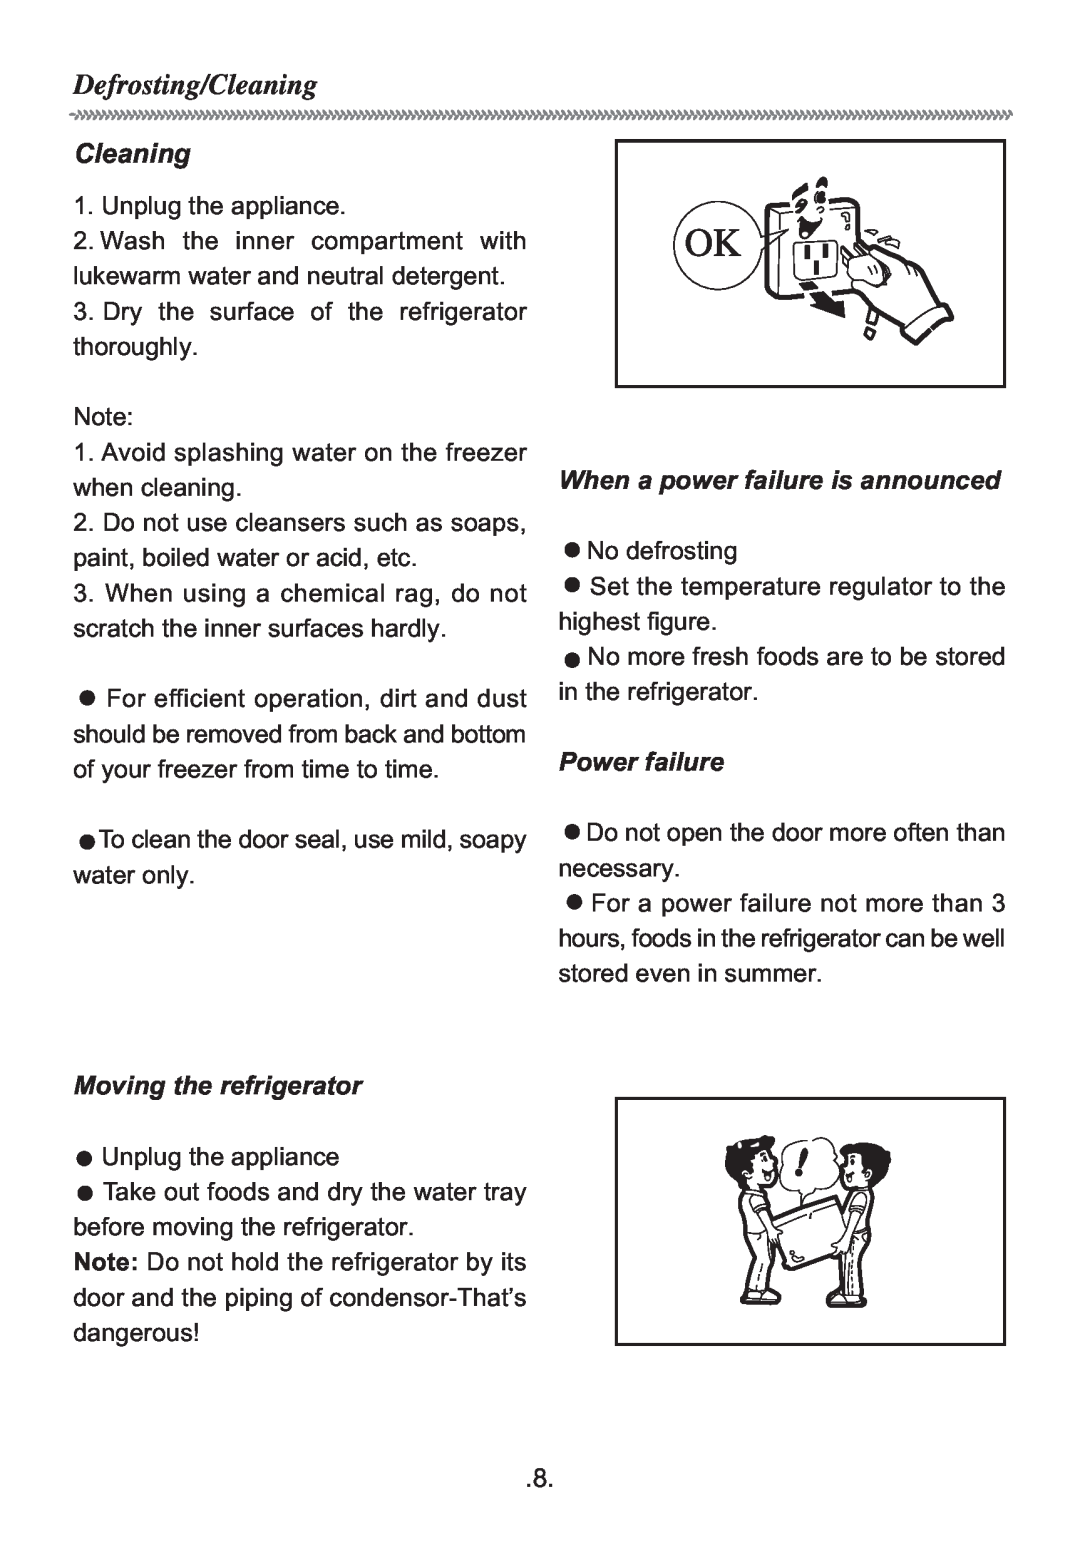 Haier HR-62 manual When a power failure is announced, Power failure, Moving the refrigerator, Defrosting/Cleaning 